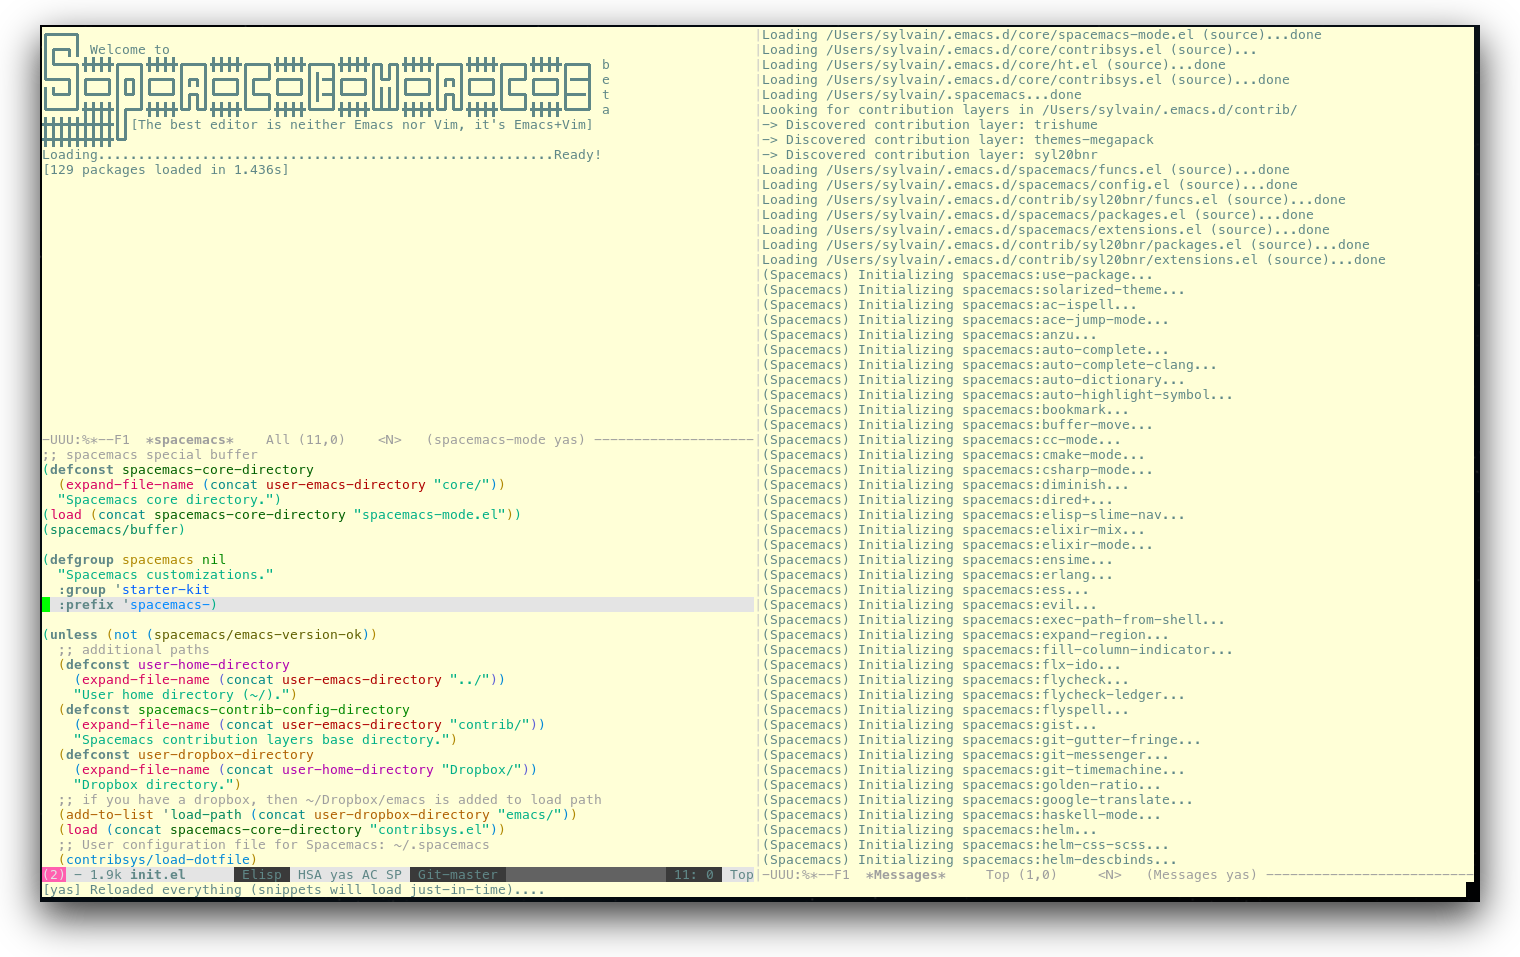 /TakeV/spacemacs/media/commit/6f4a8defac83c02d3b3c7d3d9393153782165a95/doc/img/spacemacs-urxvt.png